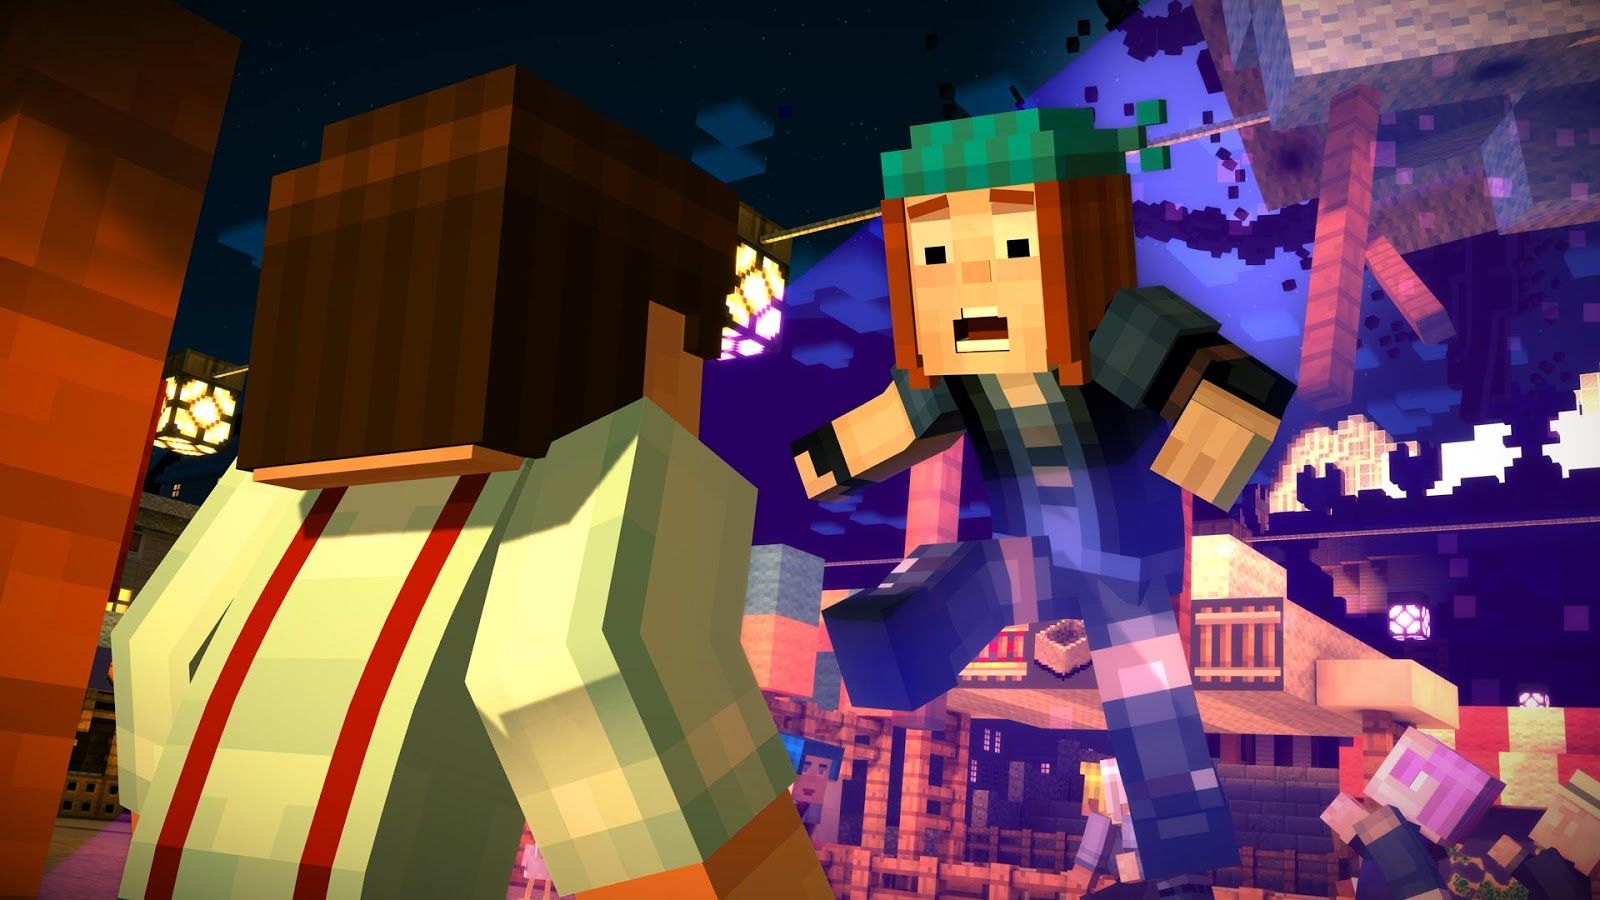 Minecraft: Story Mode From Telltale Games Available on Google Play